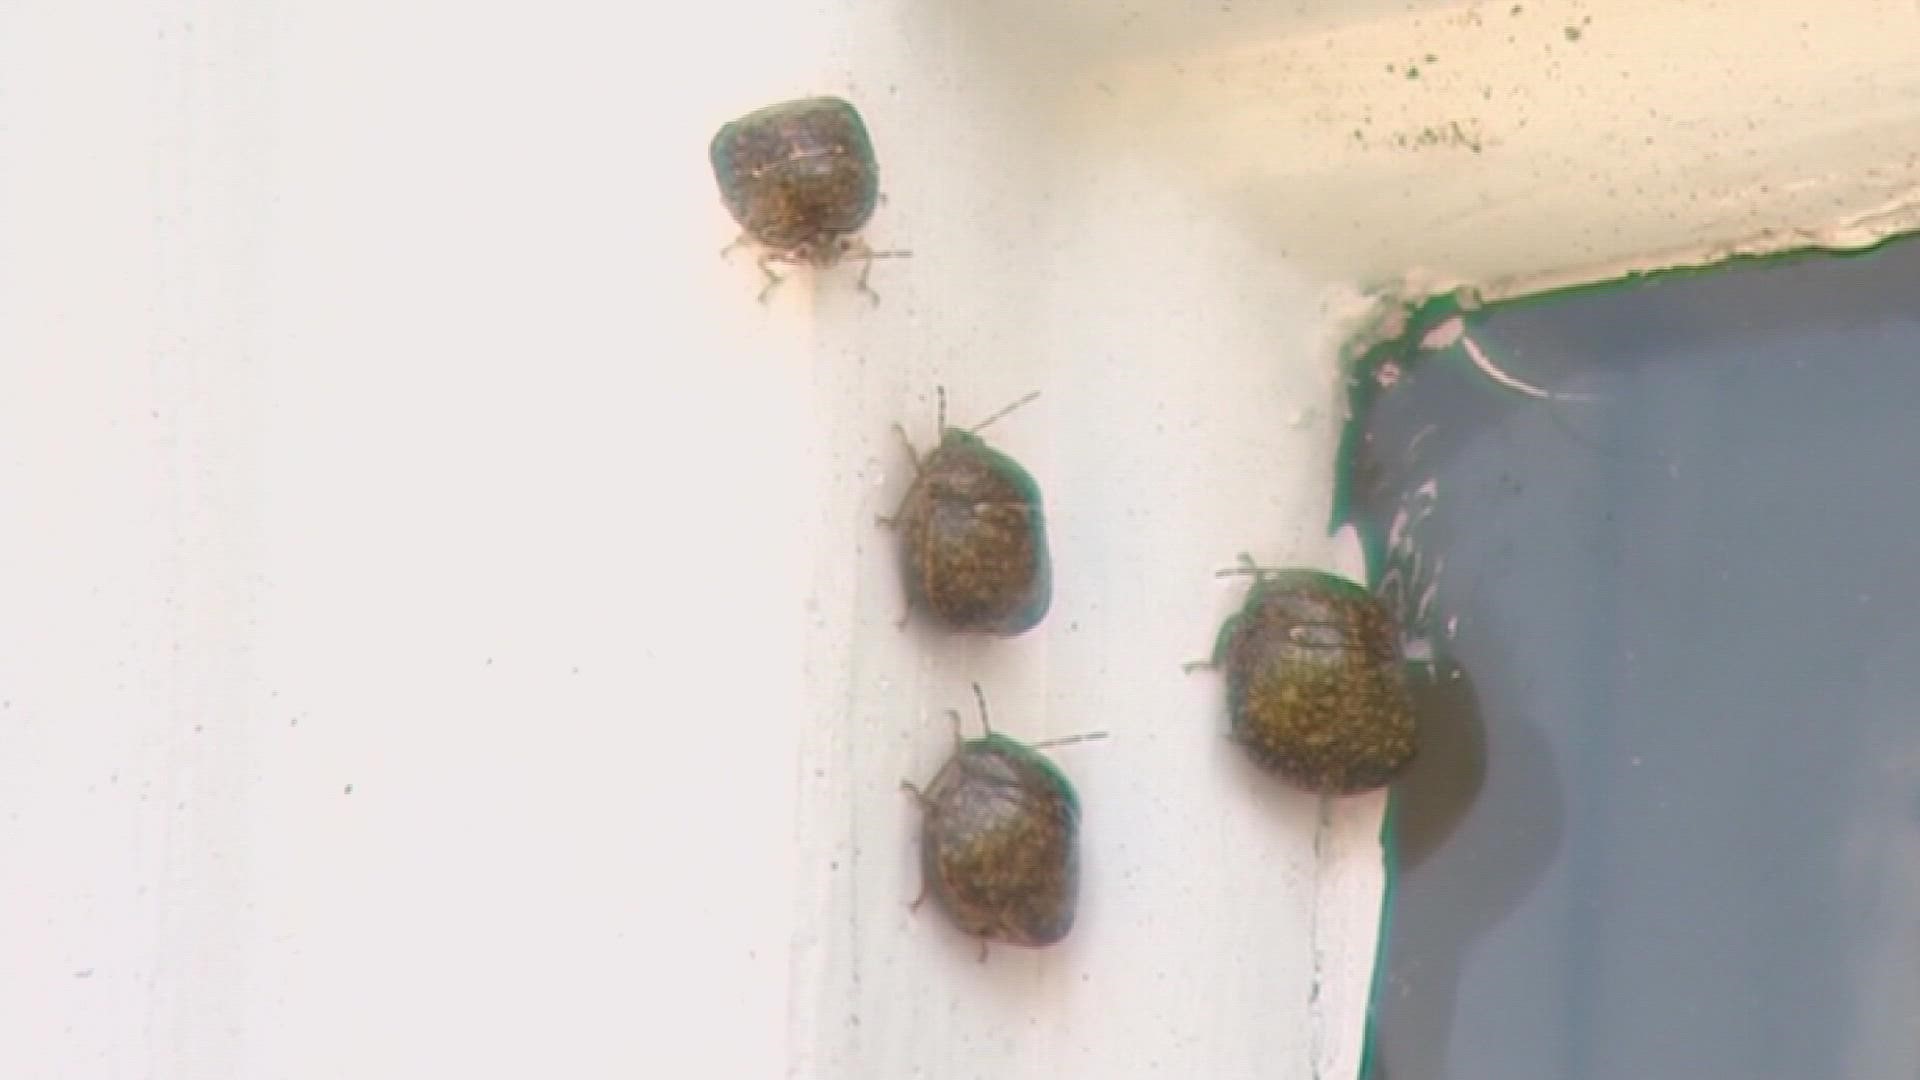 McNeely Pest Control shares ways to keep annoying insects like stink bugs out of your house.
Url: how to get rid of stink bugs